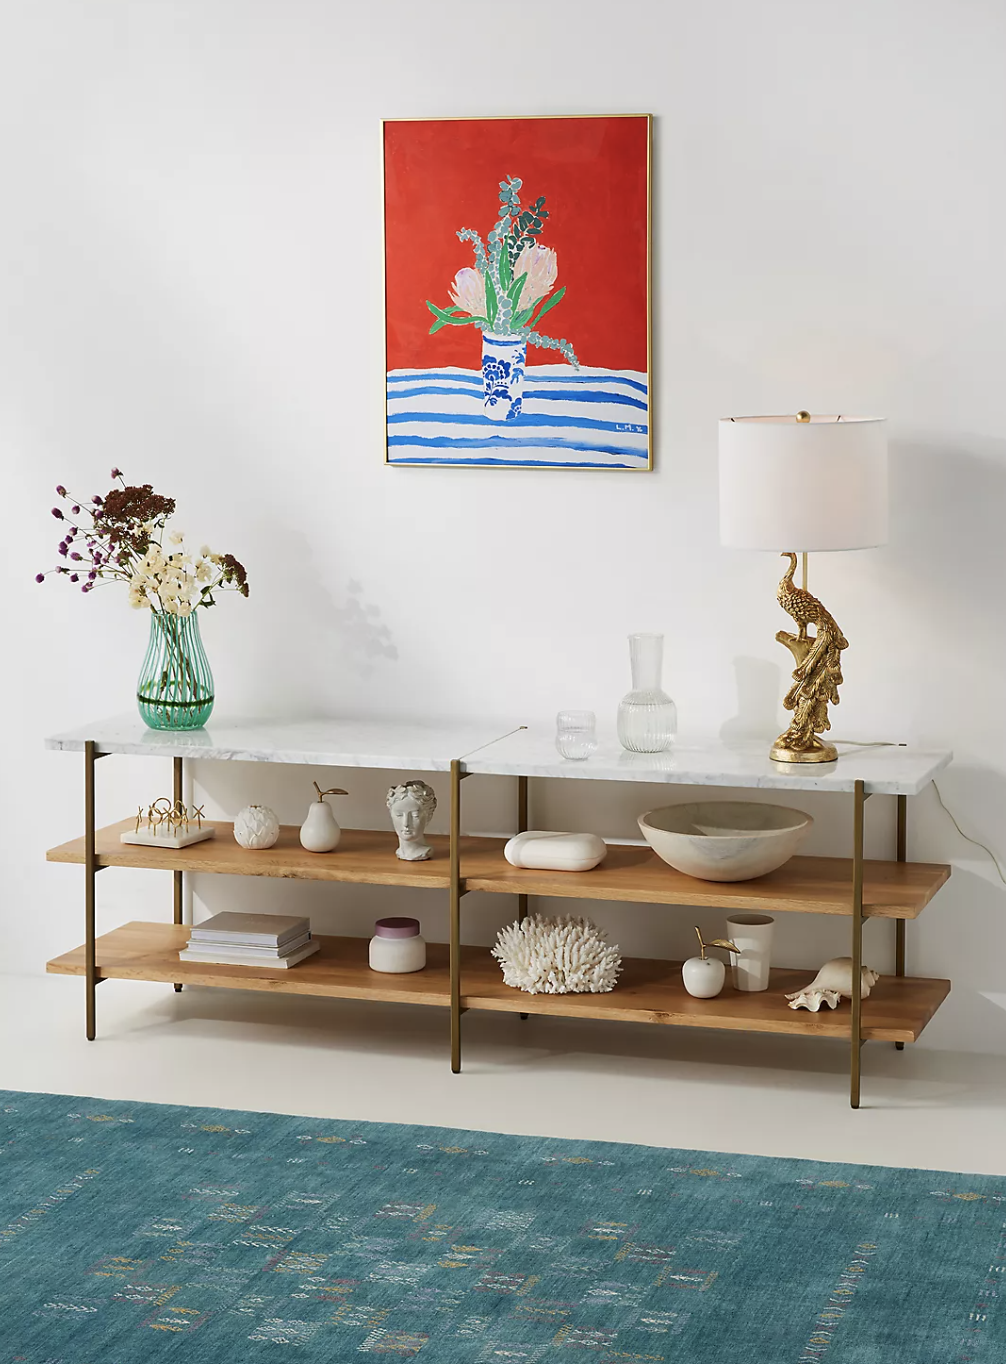 the natural colored console table with decor on it